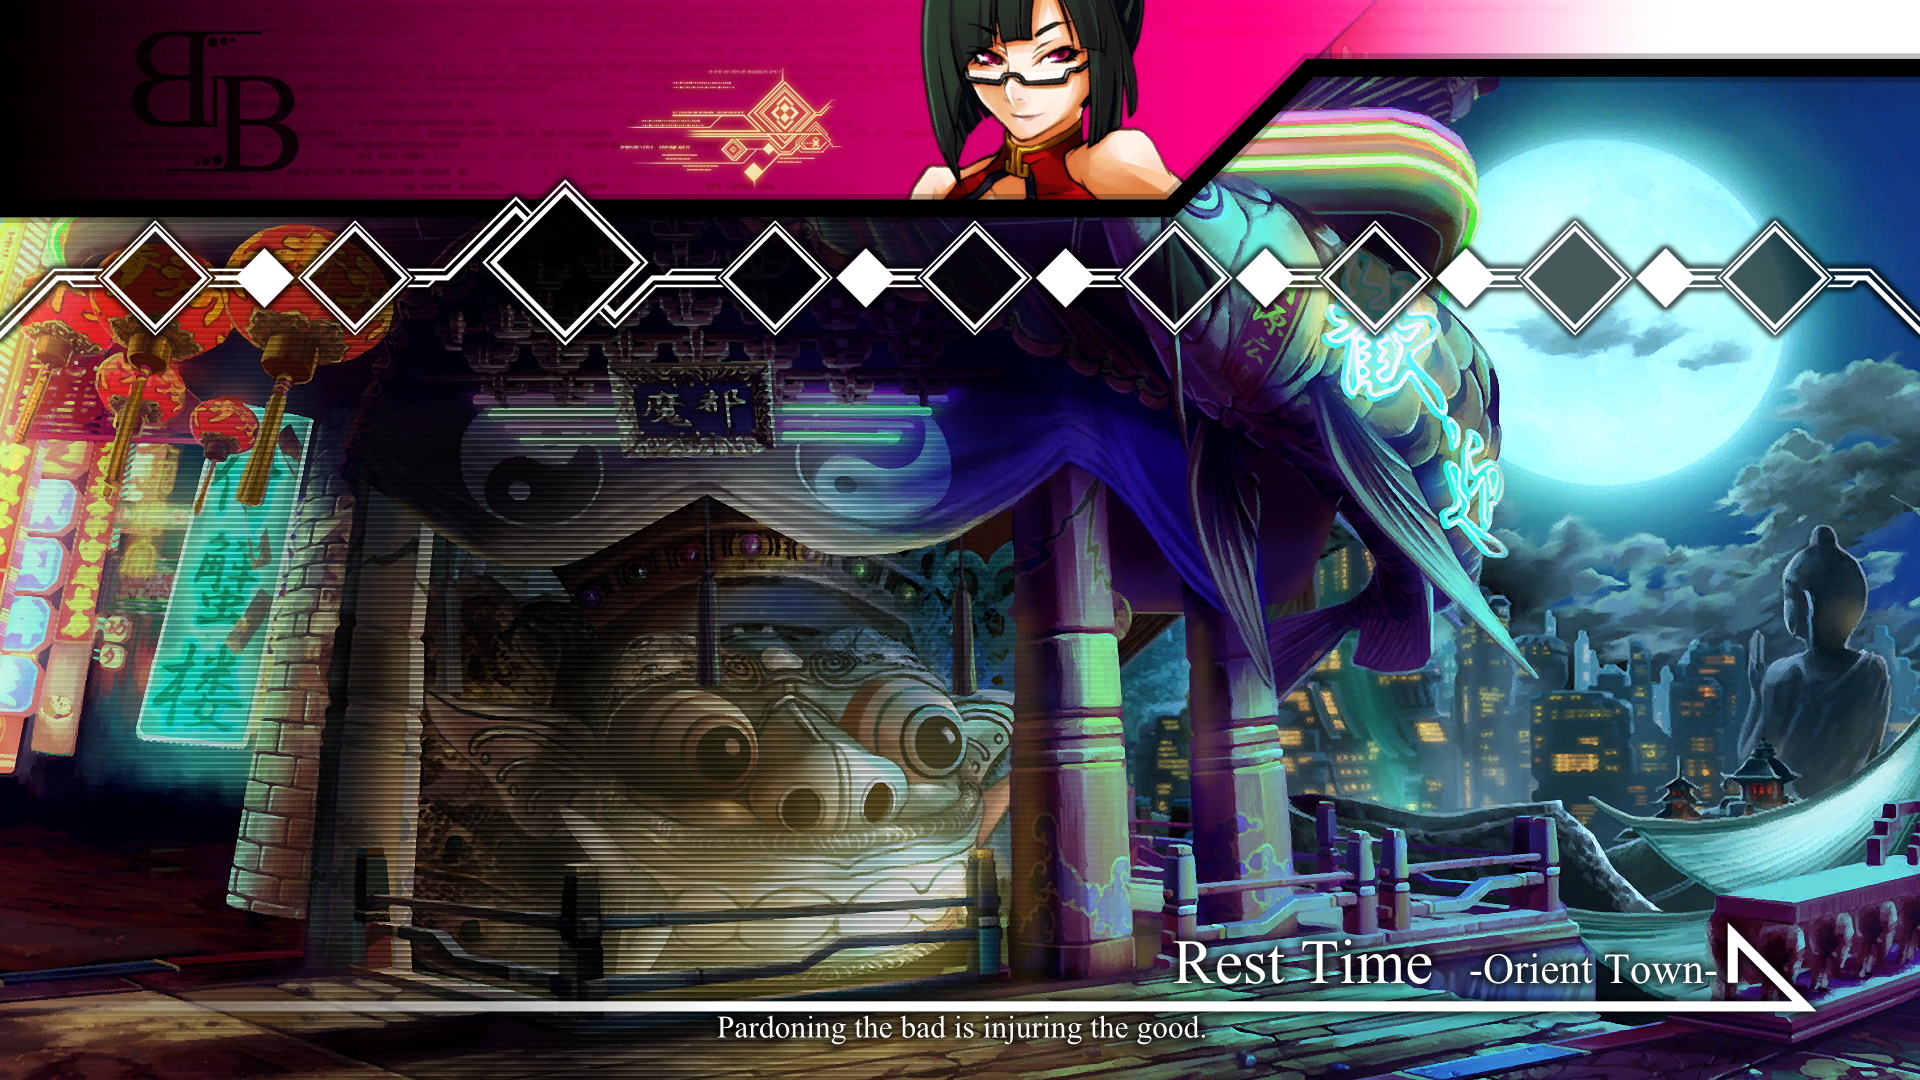 Video Game BlazBlue: Continuum Shift HD Wallpaper | Background Image